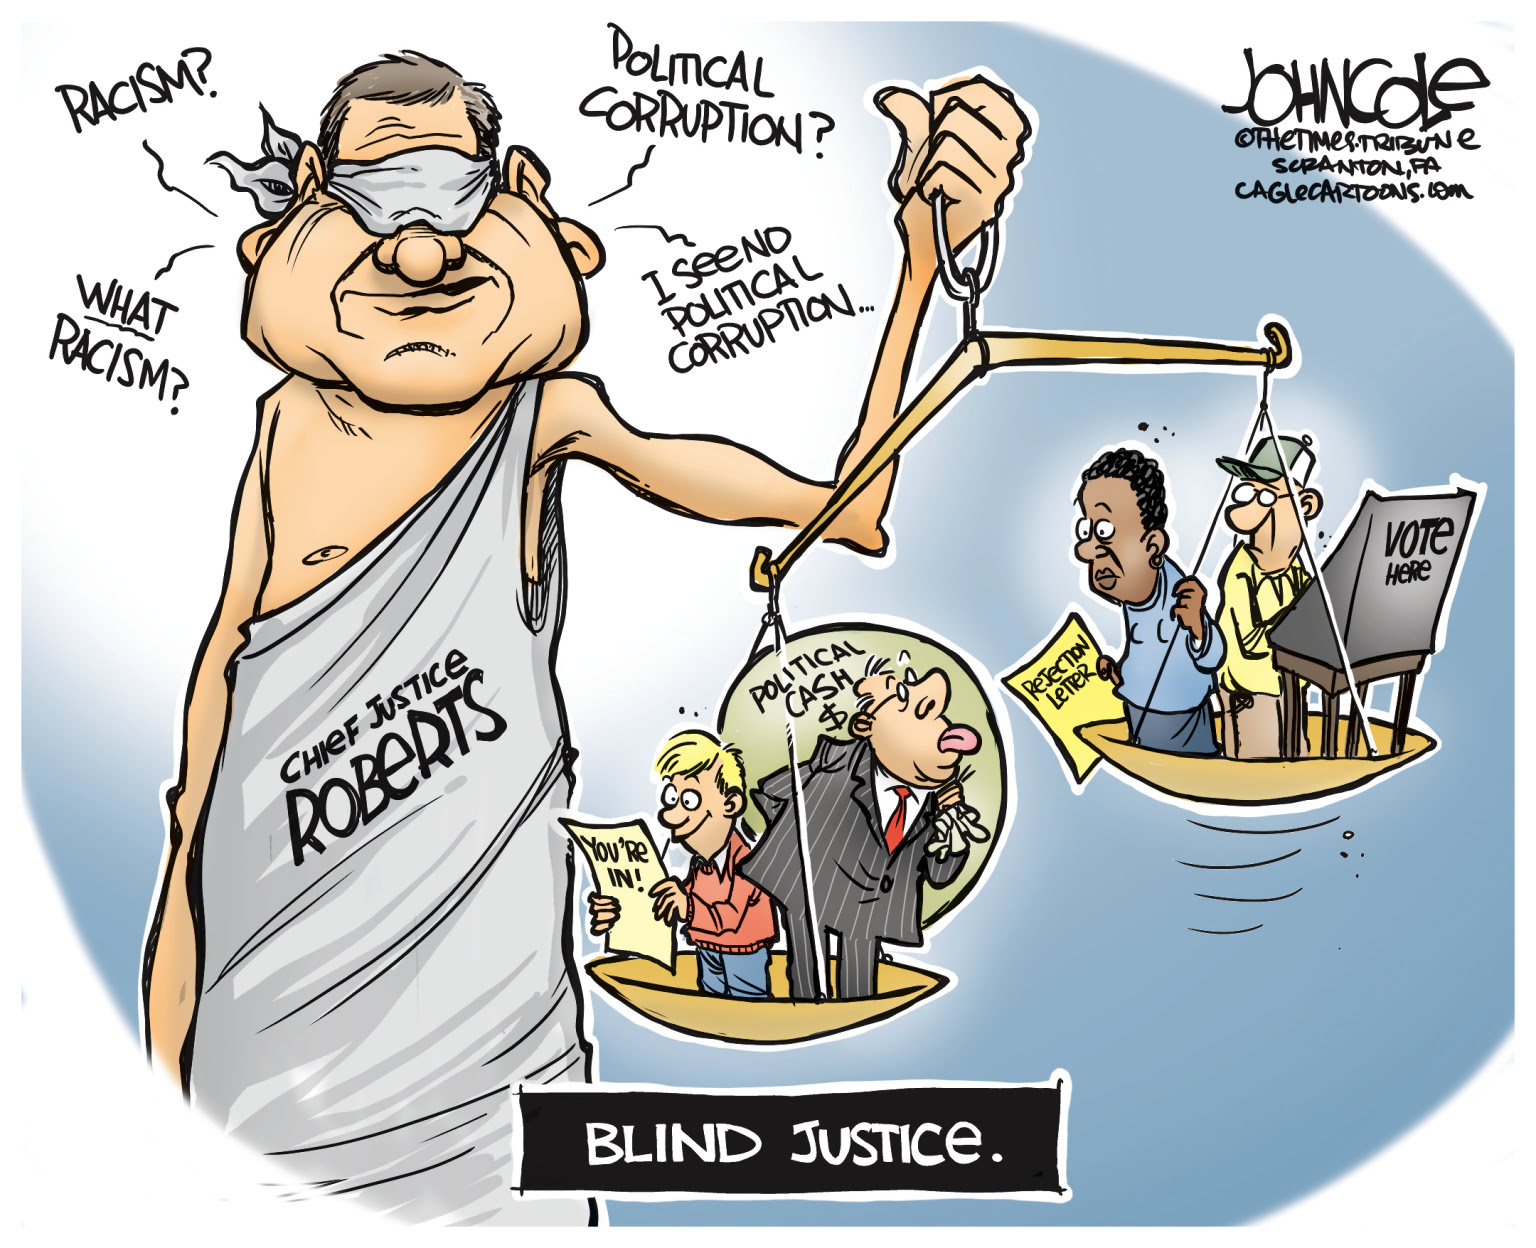 Roberts Supreme Court favors the rich at the expense of women and colored Americans.